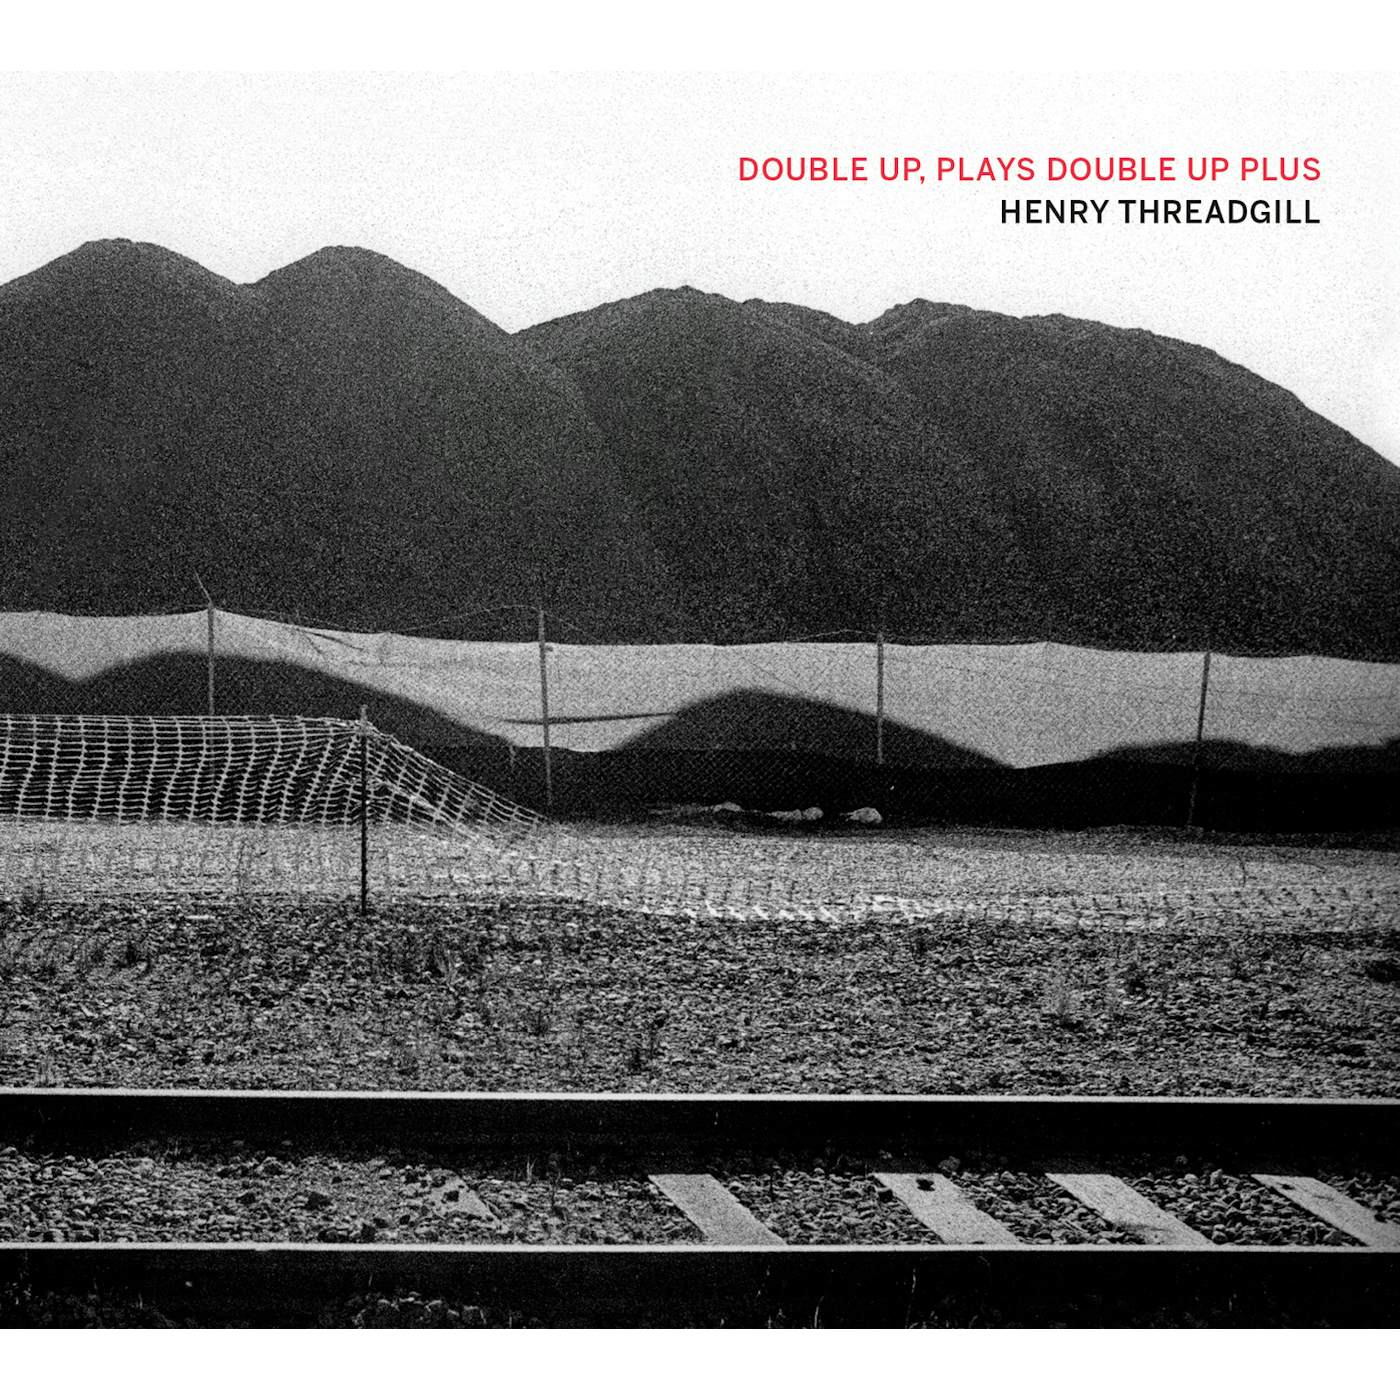 Henry Threadgill DOUBLE UP PLAYS DOUBLE UP PLUS CD